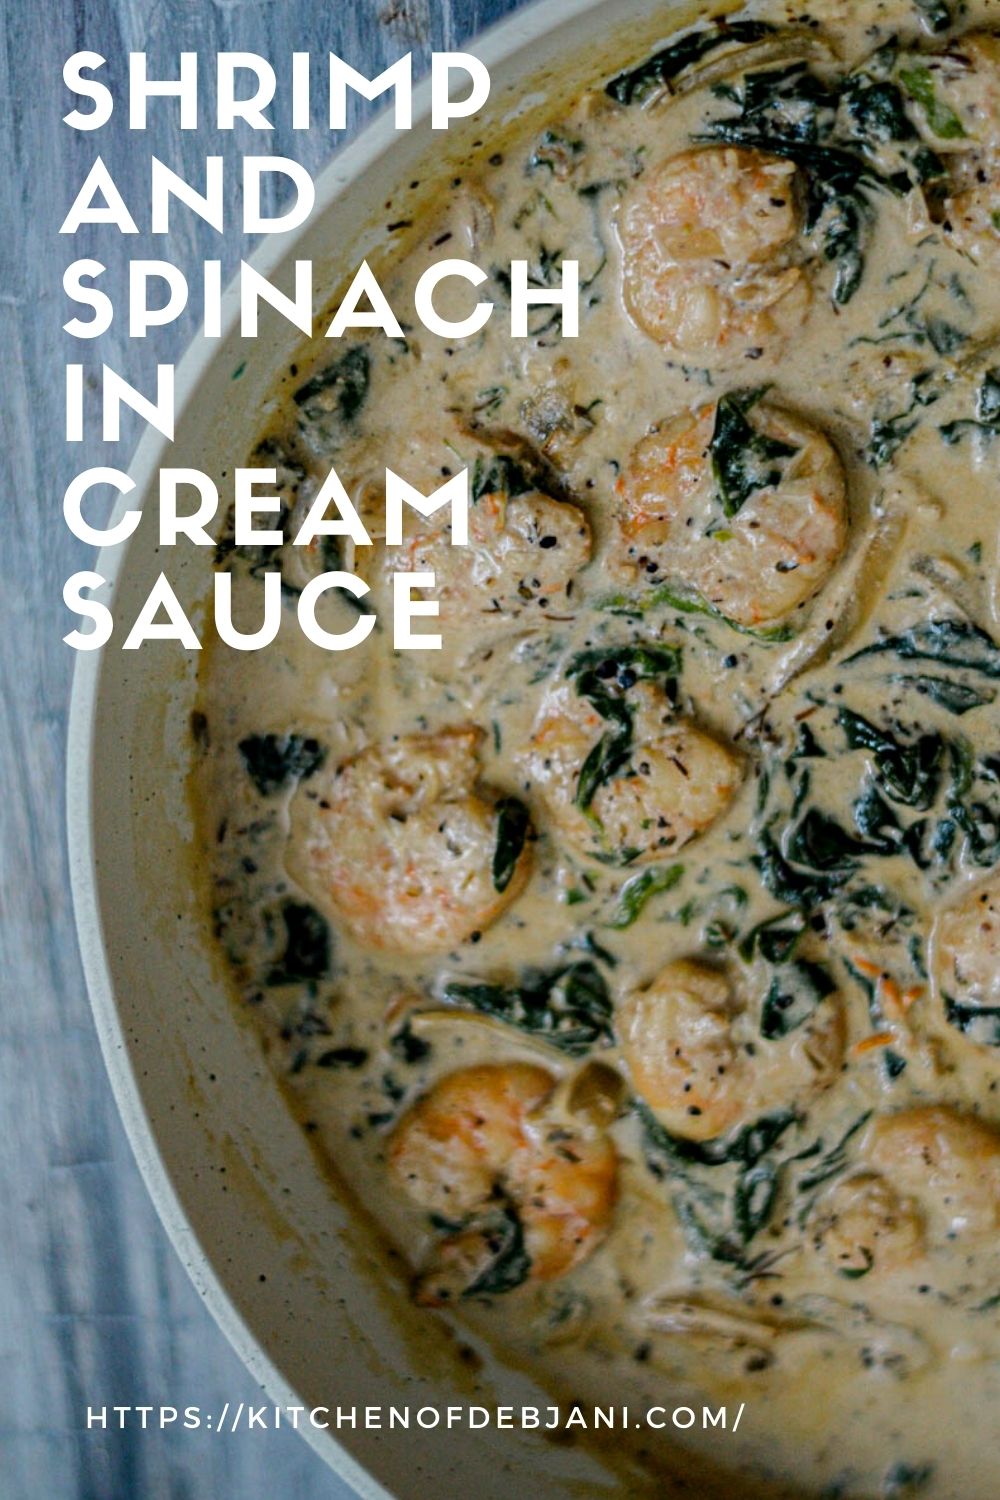 %Shrimp and spinach in cream sauce recipe Food Pinterest Pin